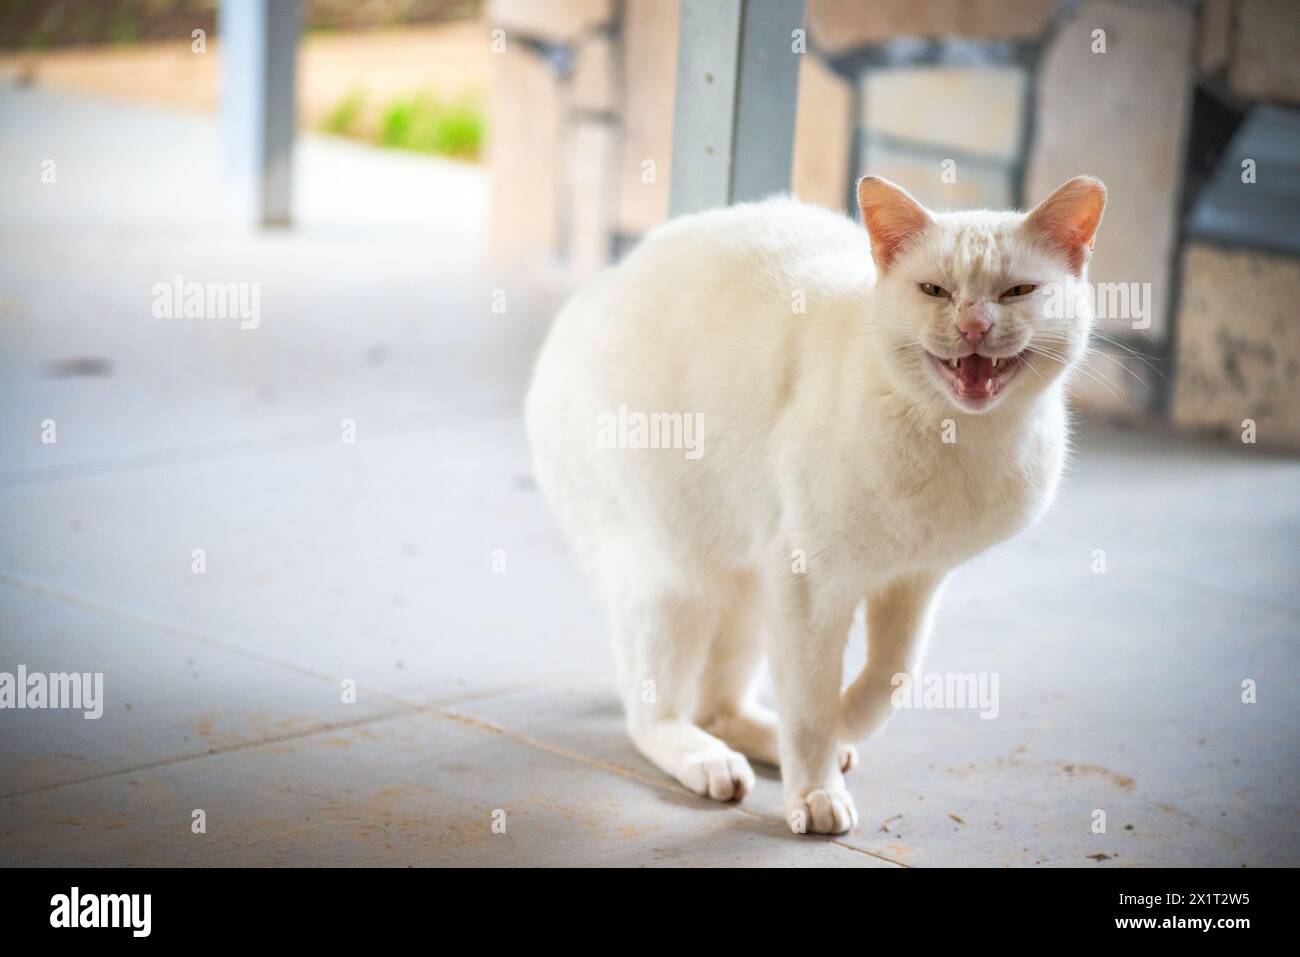 In a blizzard of fury, the white cat stands aggressively on the ground, ready for battle, hissing and snarling. Stock Photo